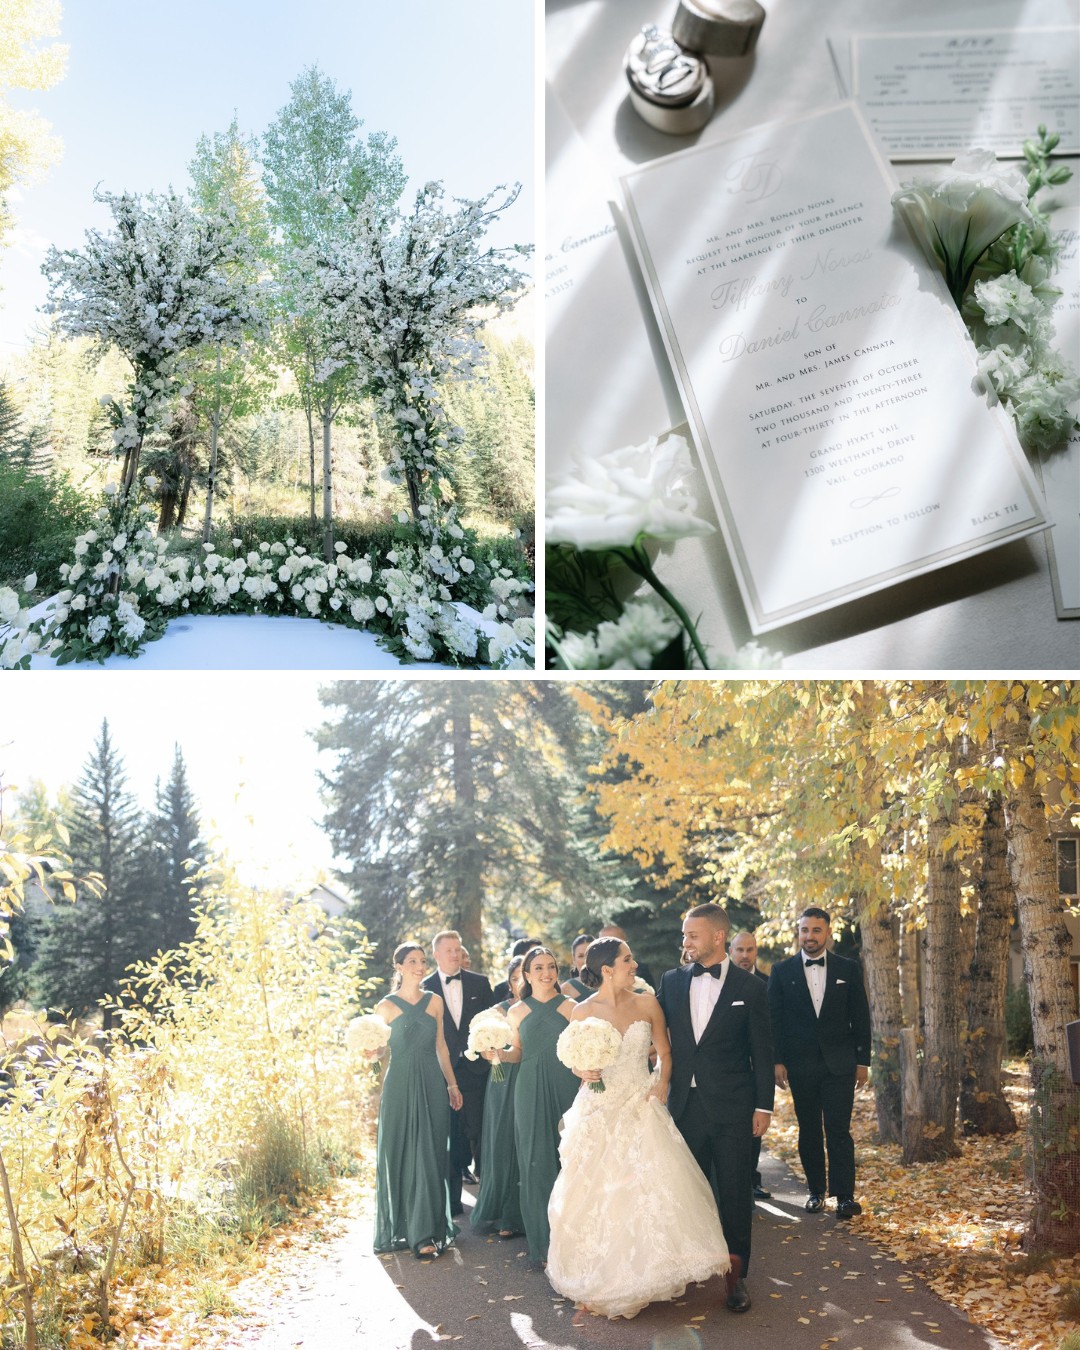 white florals, stationery, couple with bridal party in woods